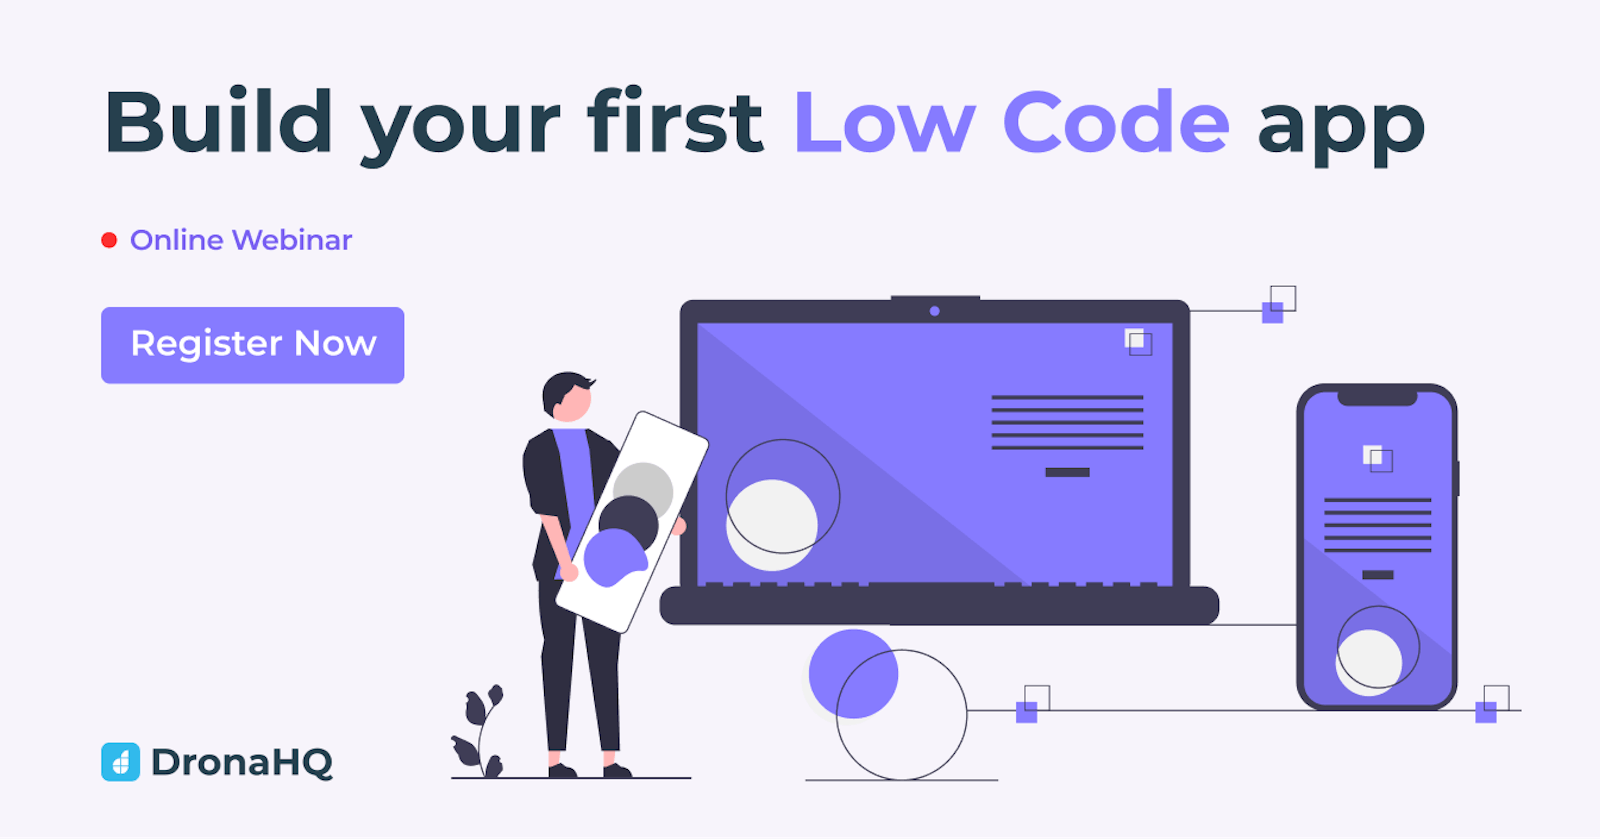 Building your first low-code app